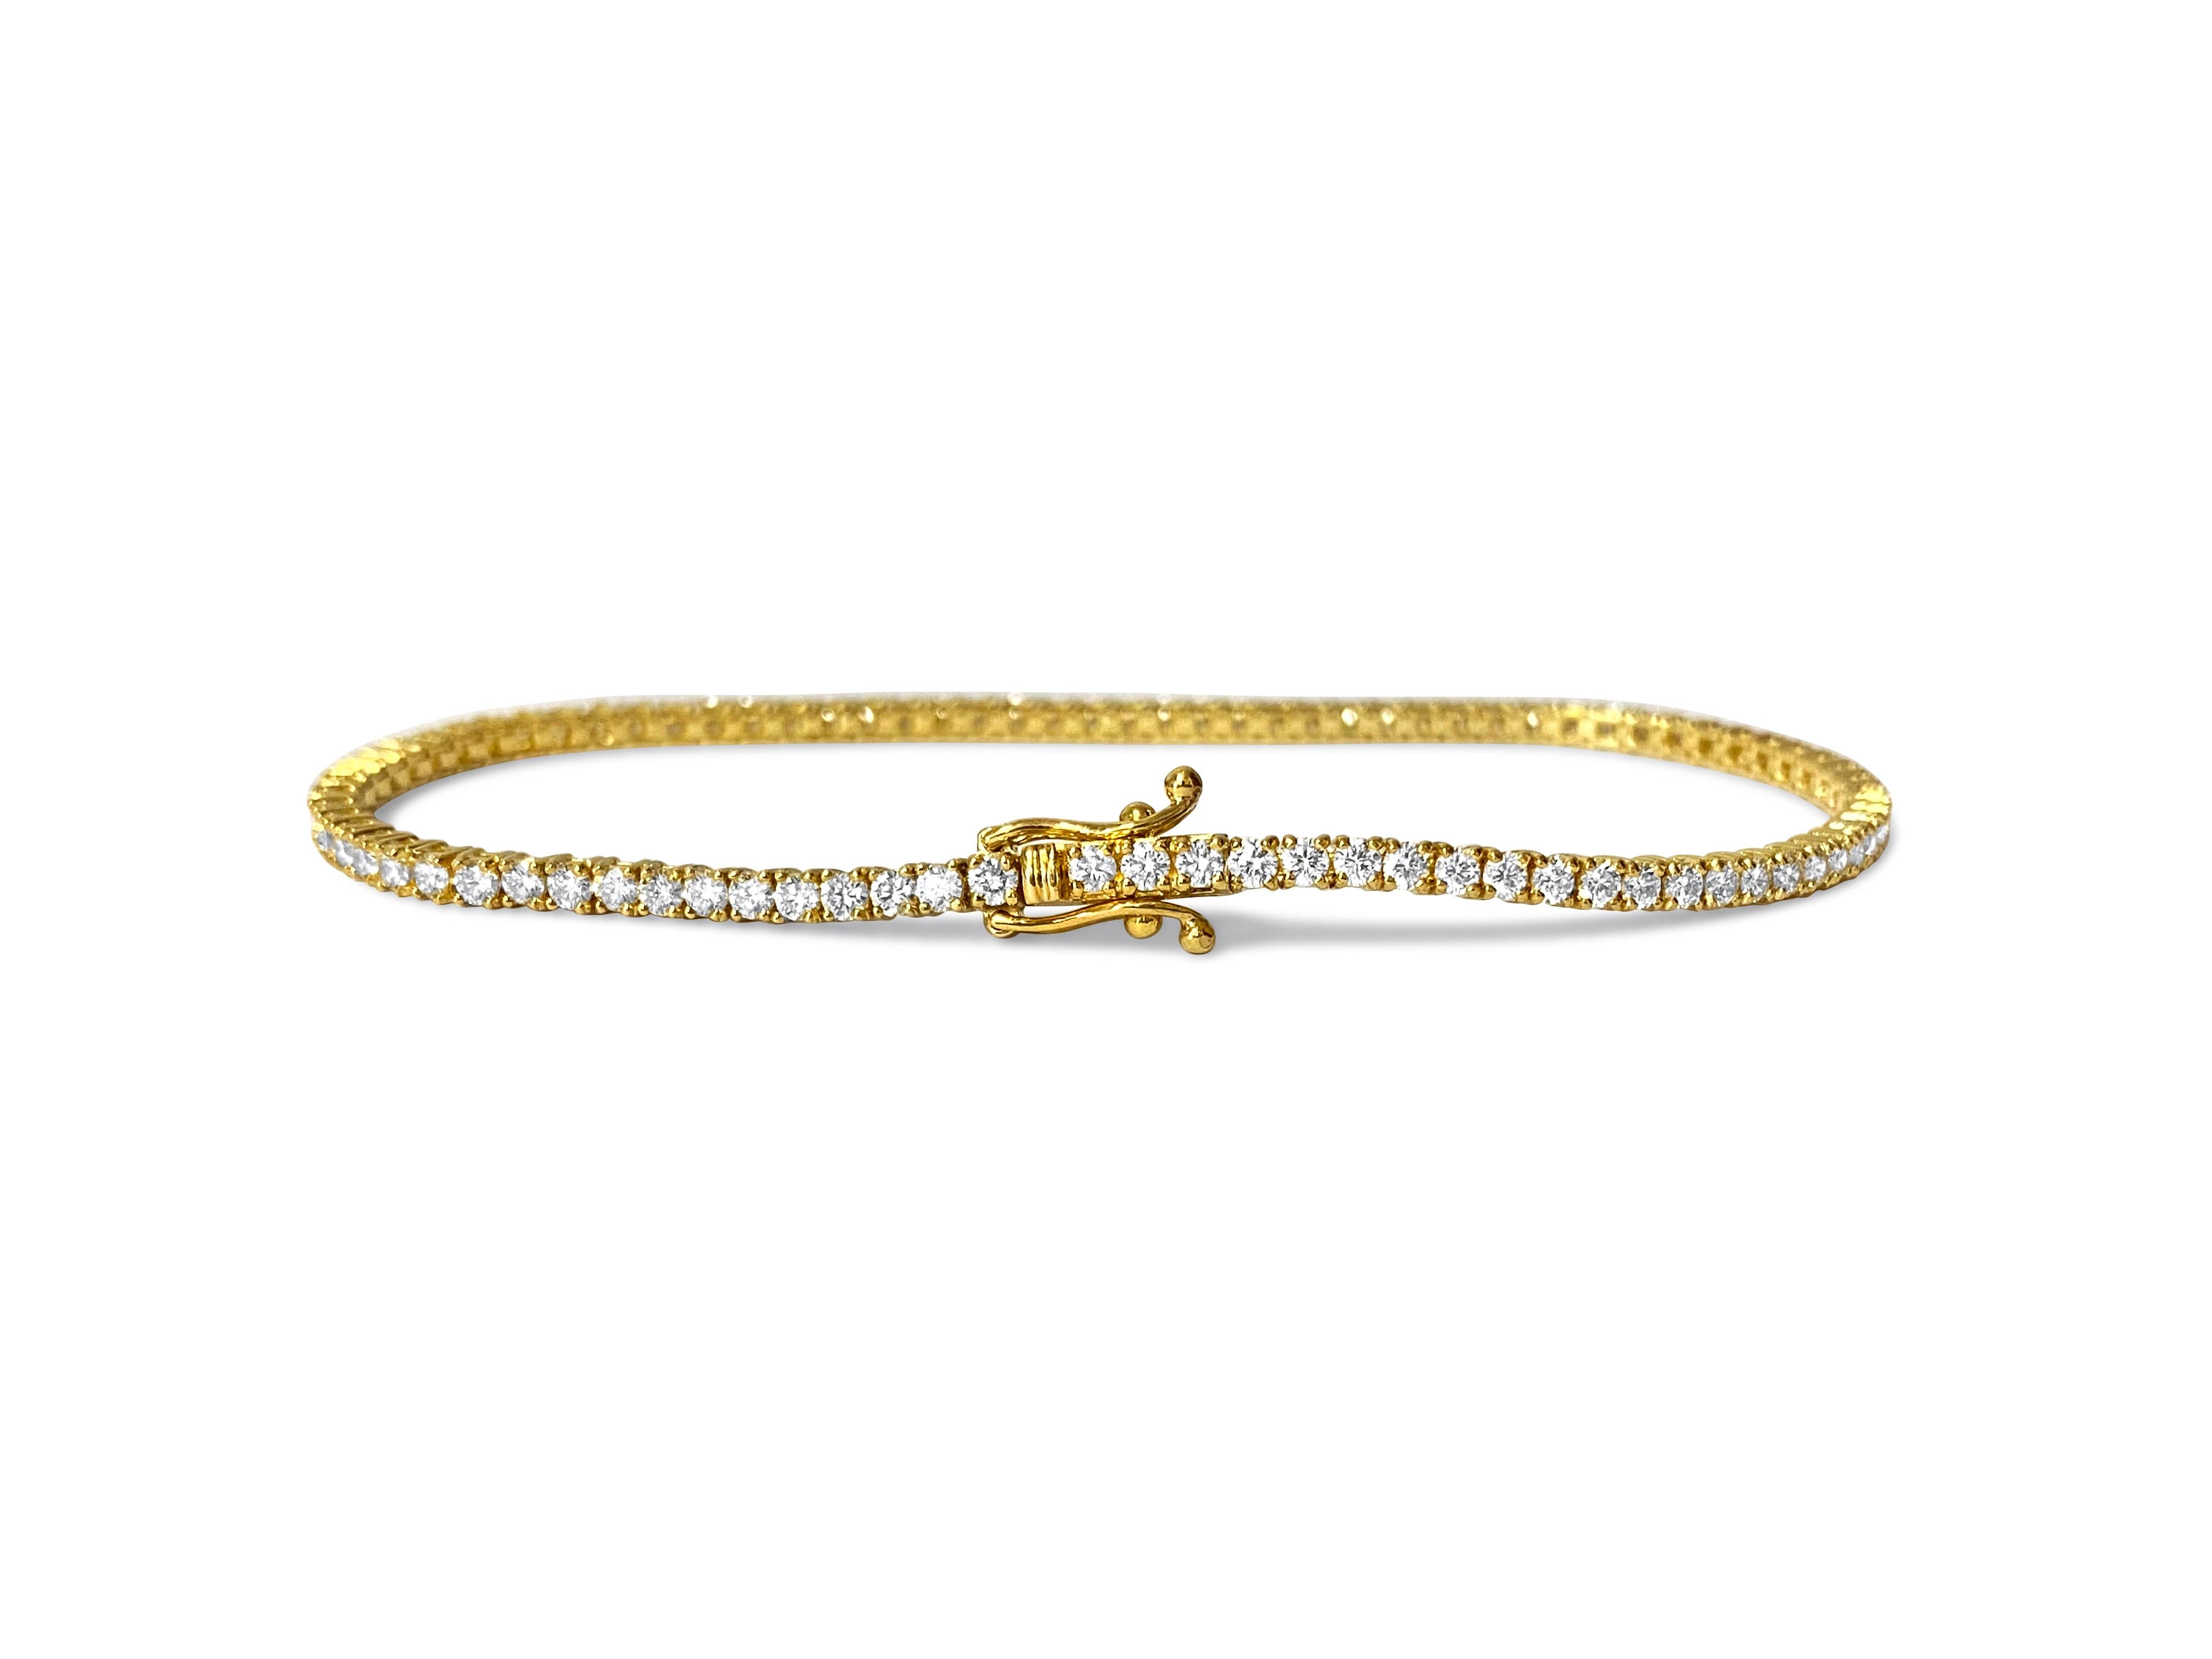 Created in stunning 14k yellow gold, this top-of-the-line diamond tennis bracelet showcases a remarkable 3.52 carats of round brilliant cut diamonds, each boasting VVS-VS clarity and H color for exceptional brilliance and radiance. Set securely in